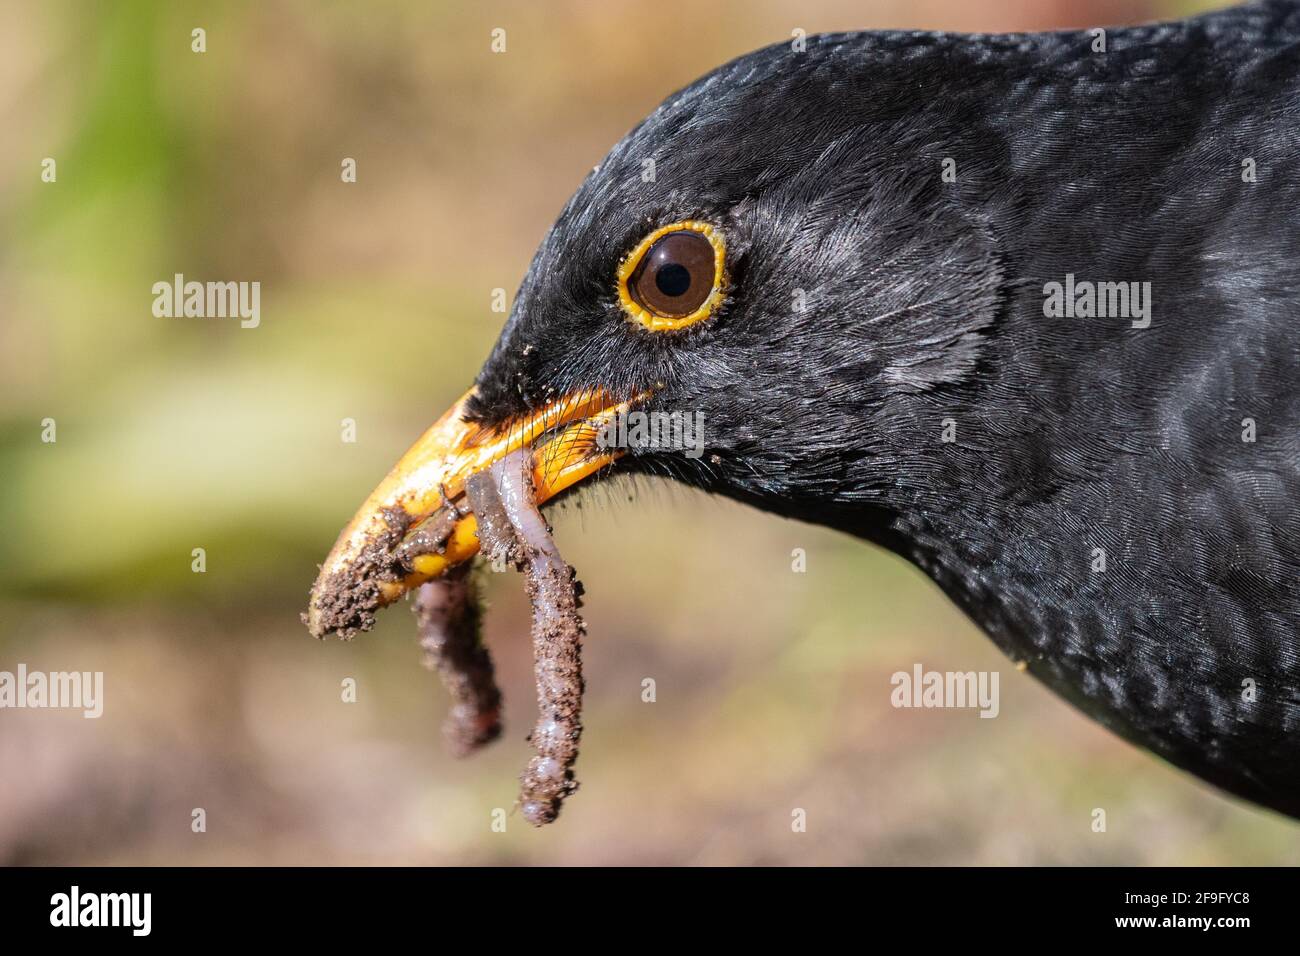 Closeup of male Blackbird with worms in its beak Stock Photo